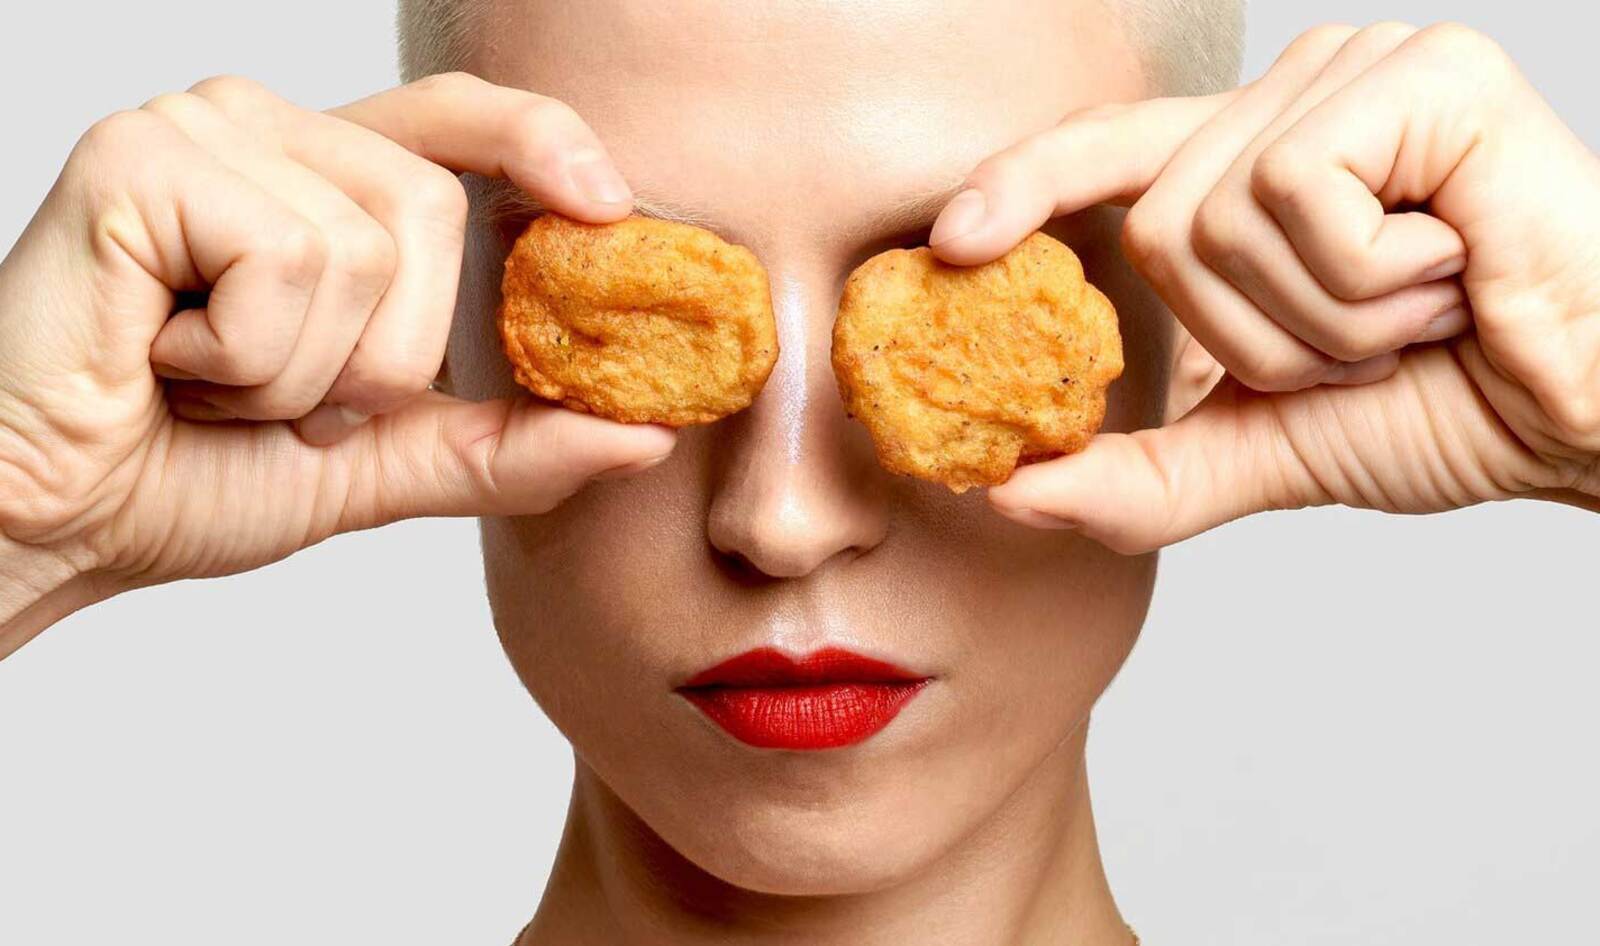 NUGGS Vegan Chicken Nuggets Arrive in Canada and Here’s Where to Get Them